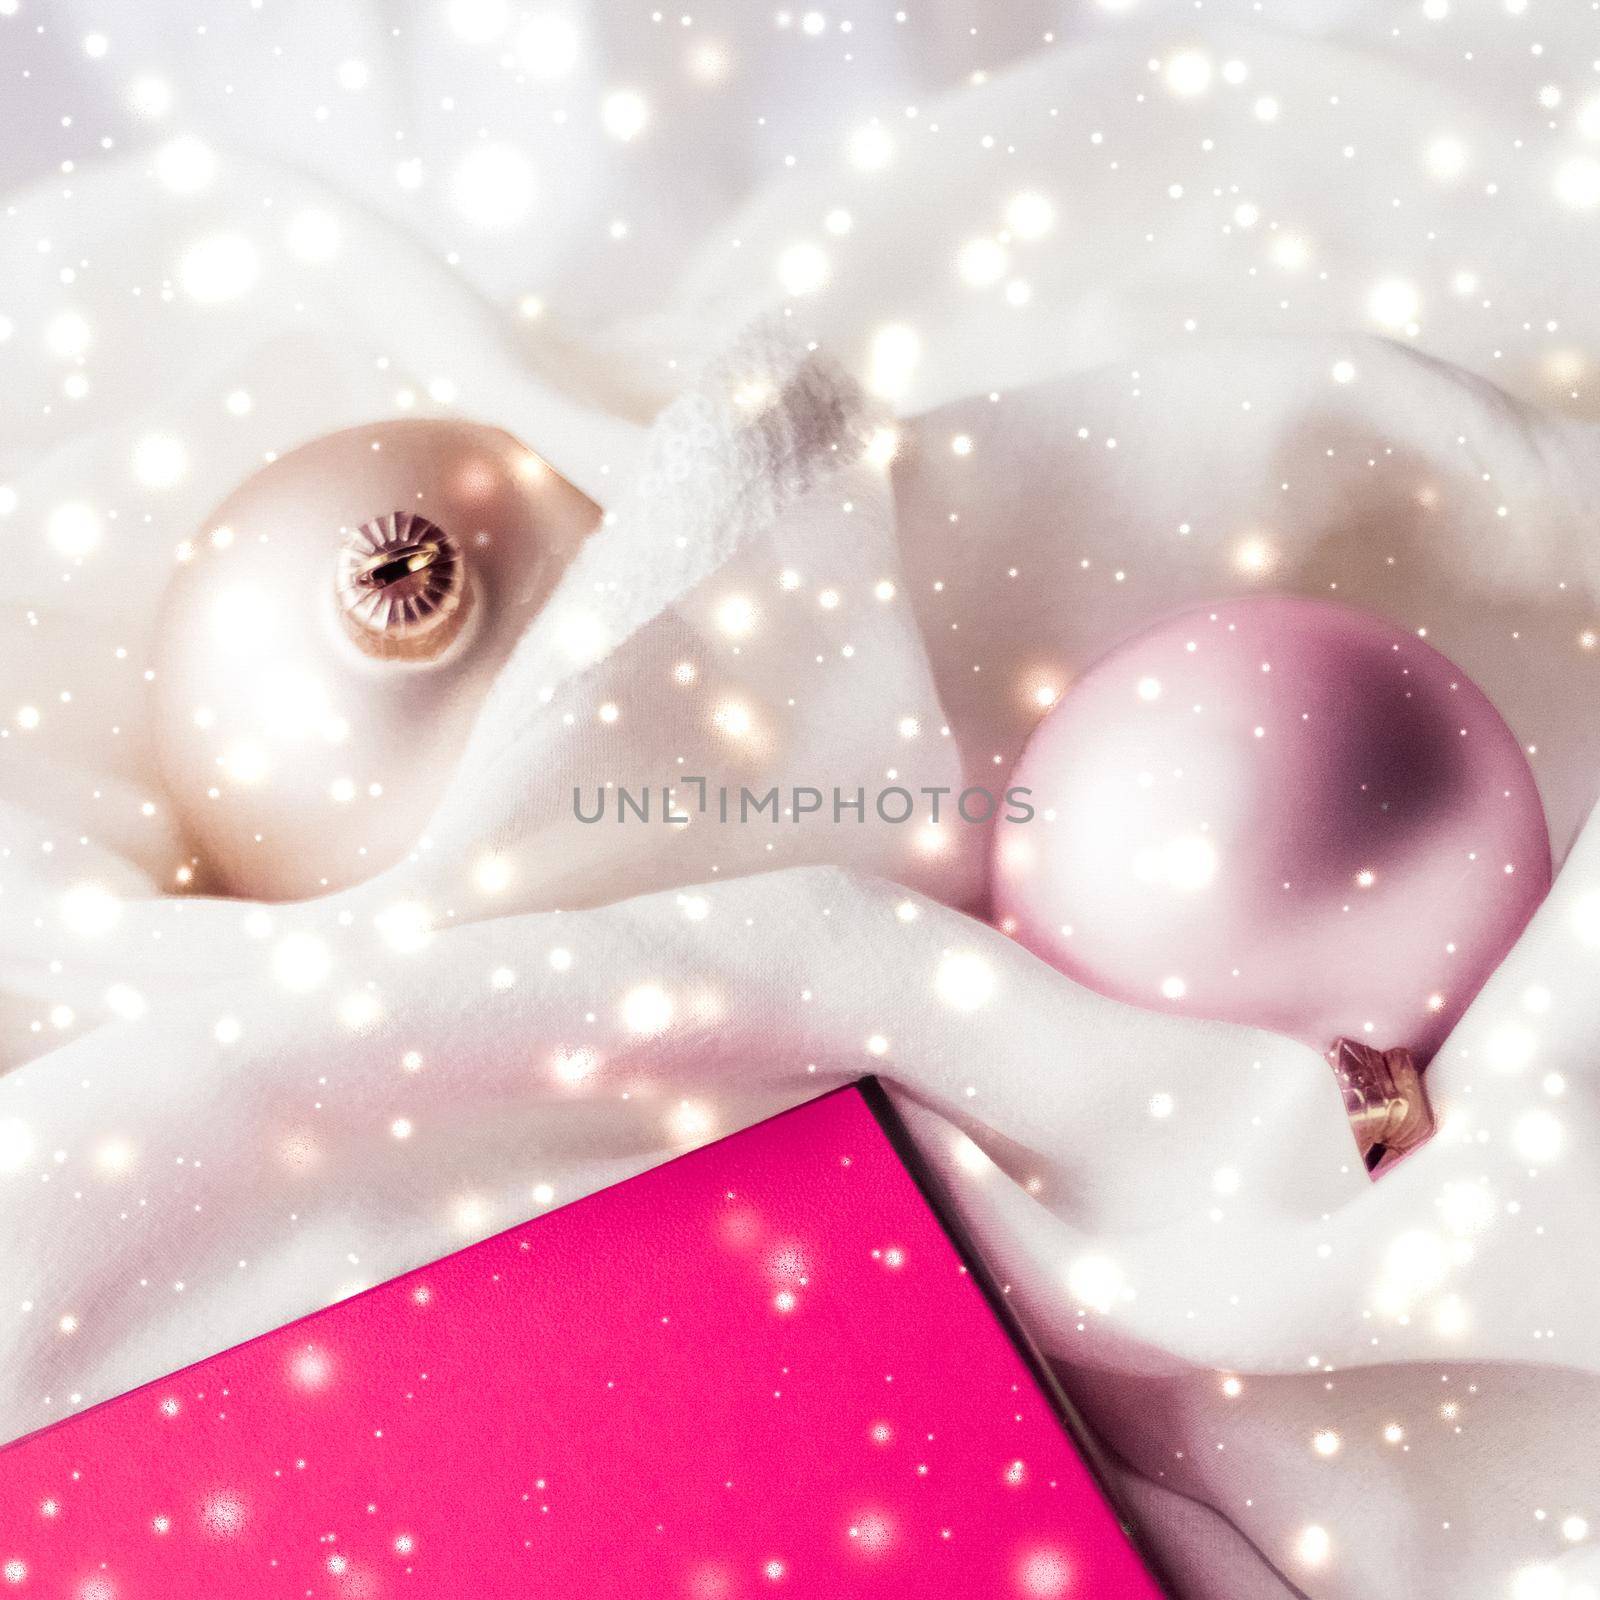 Christmas magic holiday background, festive baubles, pink vintage gift box and golden glitter as winter season present for luxury brand design by Anneleven